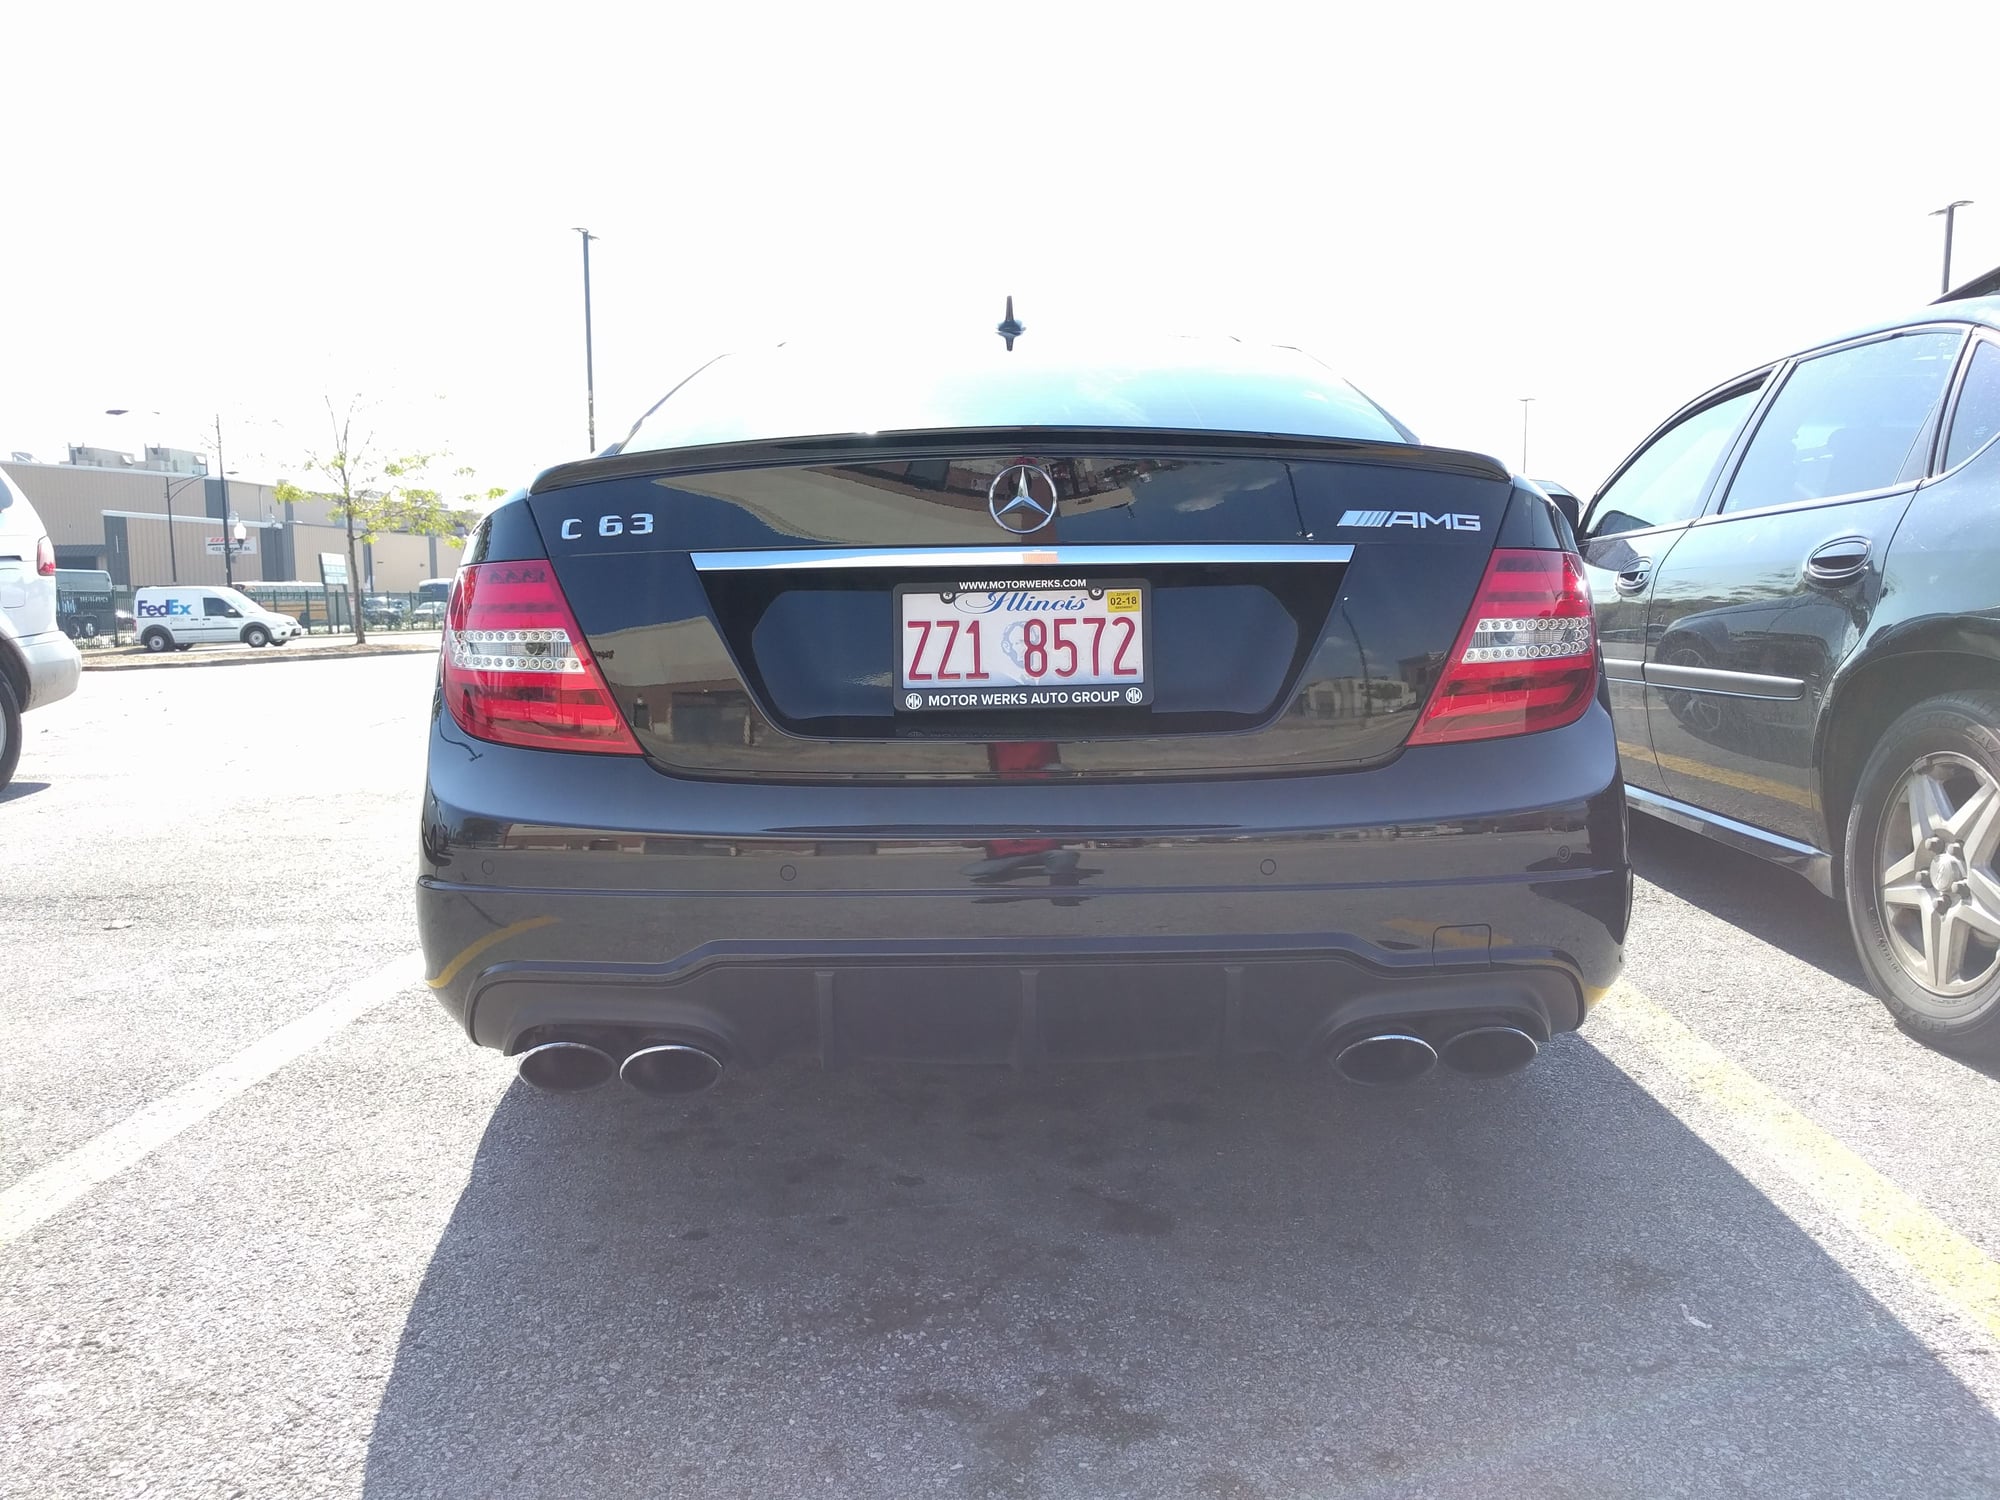 2014 Mercedes-Benz C63 AMG - 2014 Mercedes Benz C63 507 - Used - VIN WDDGJ7HB2EG171346 - 47,000 Miles - 8 cyl - 2WD - Automatic - Coupe - Black - Chicago, IL 60661, United States